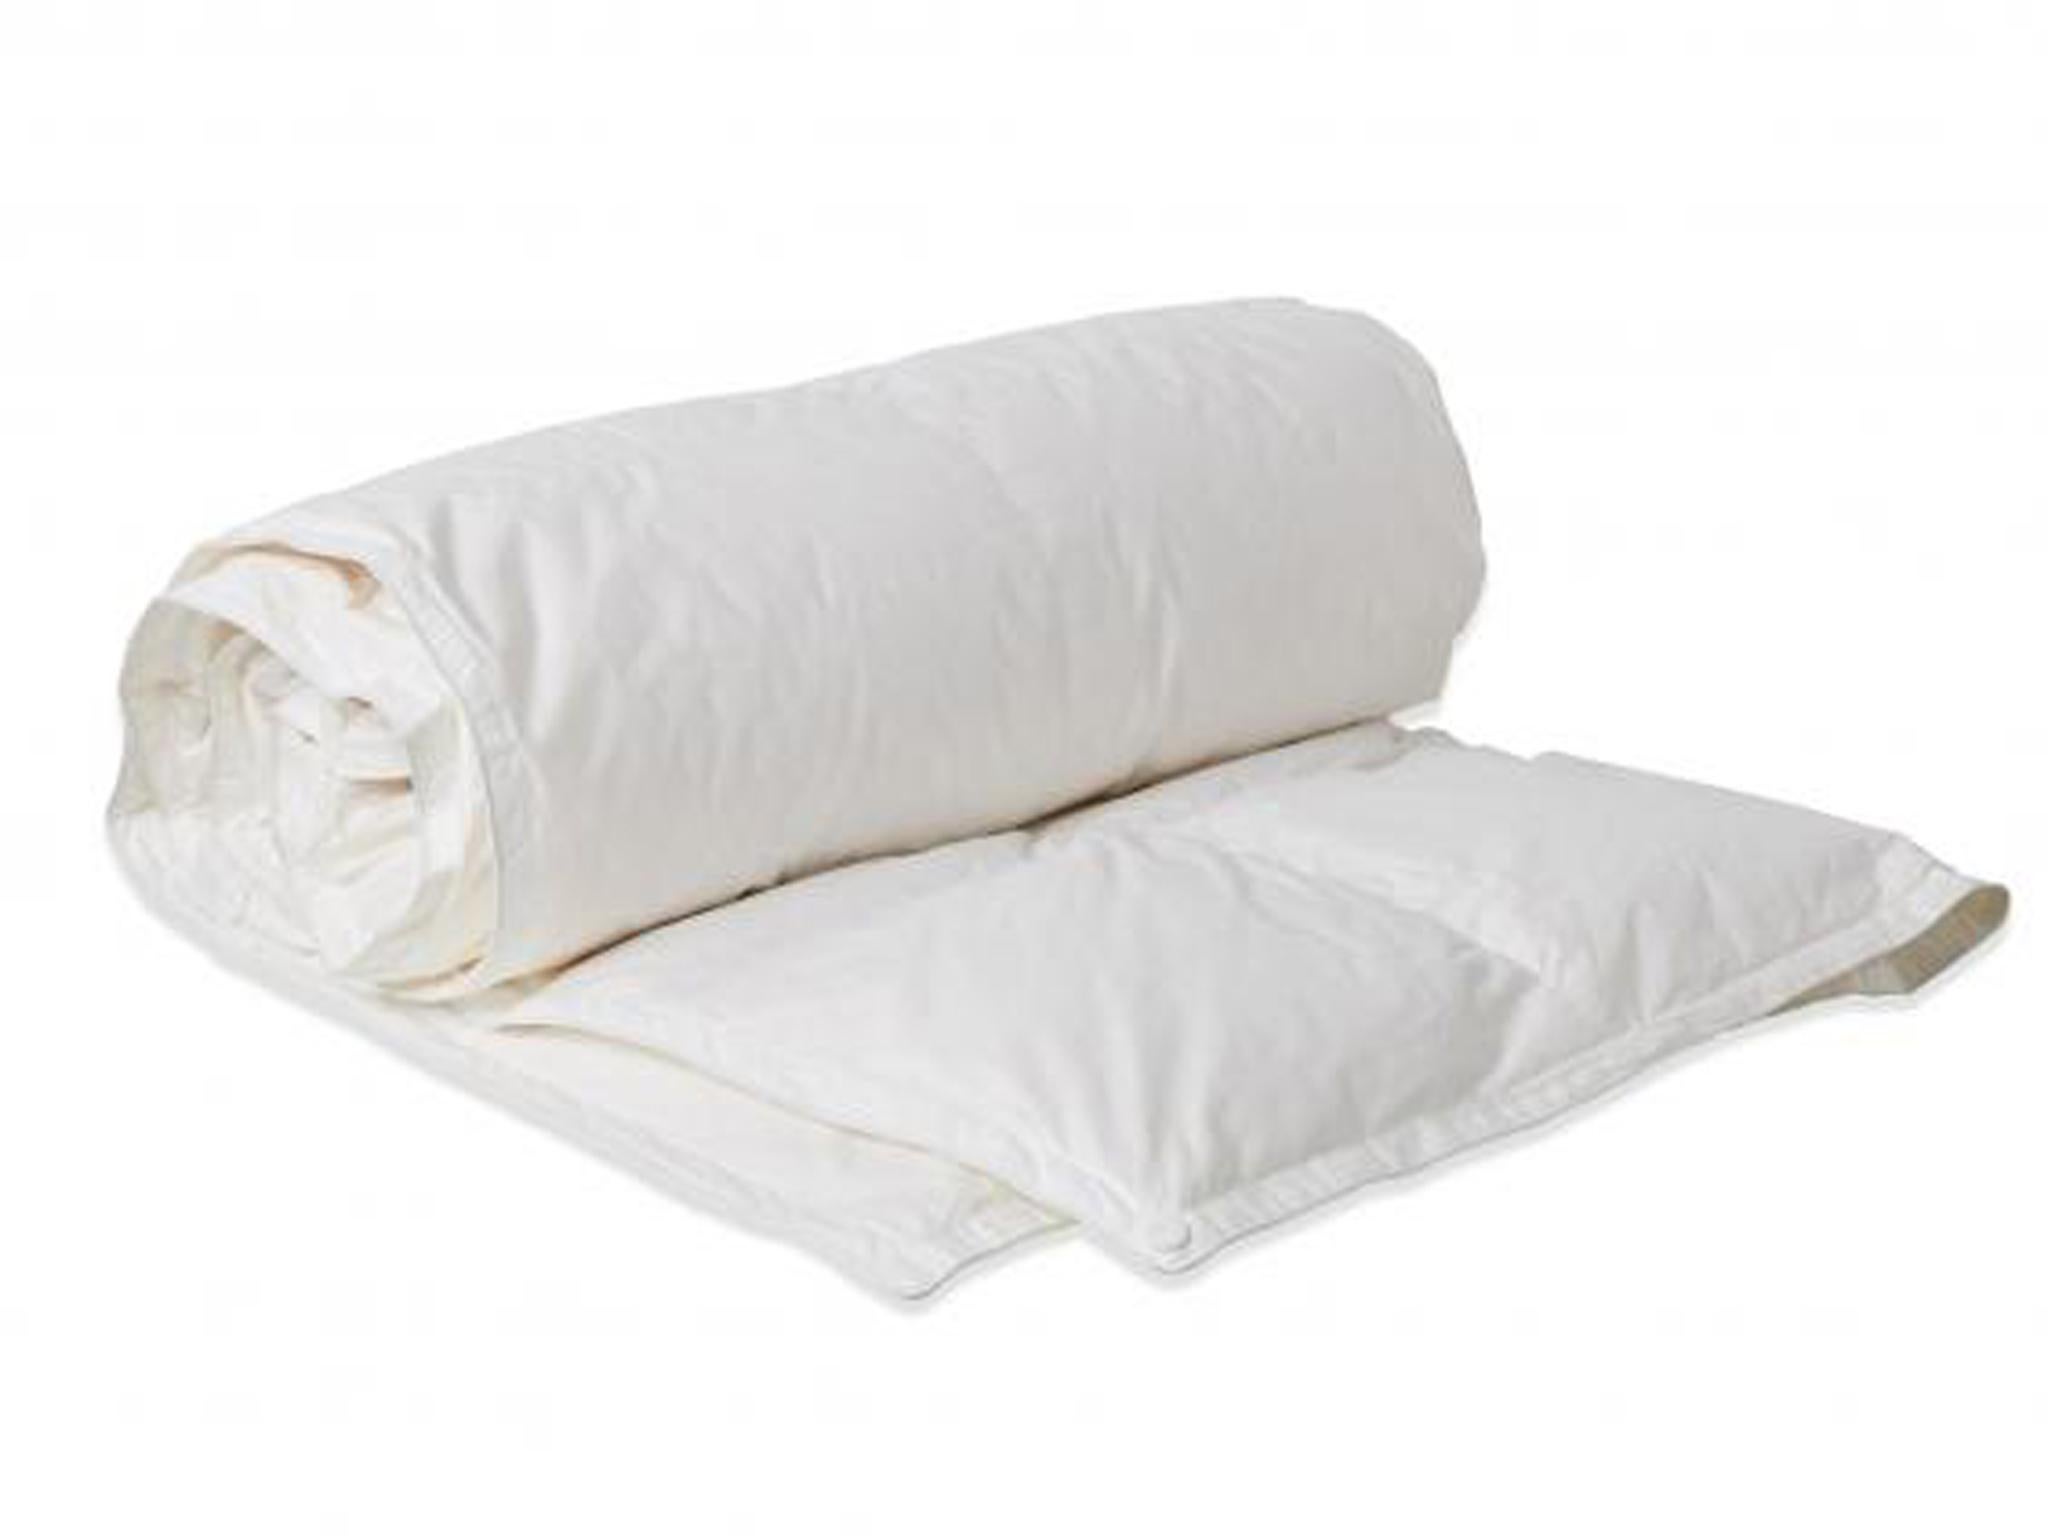 How To Choose A Duvet Find Out What Tog Filling And Size Is Best